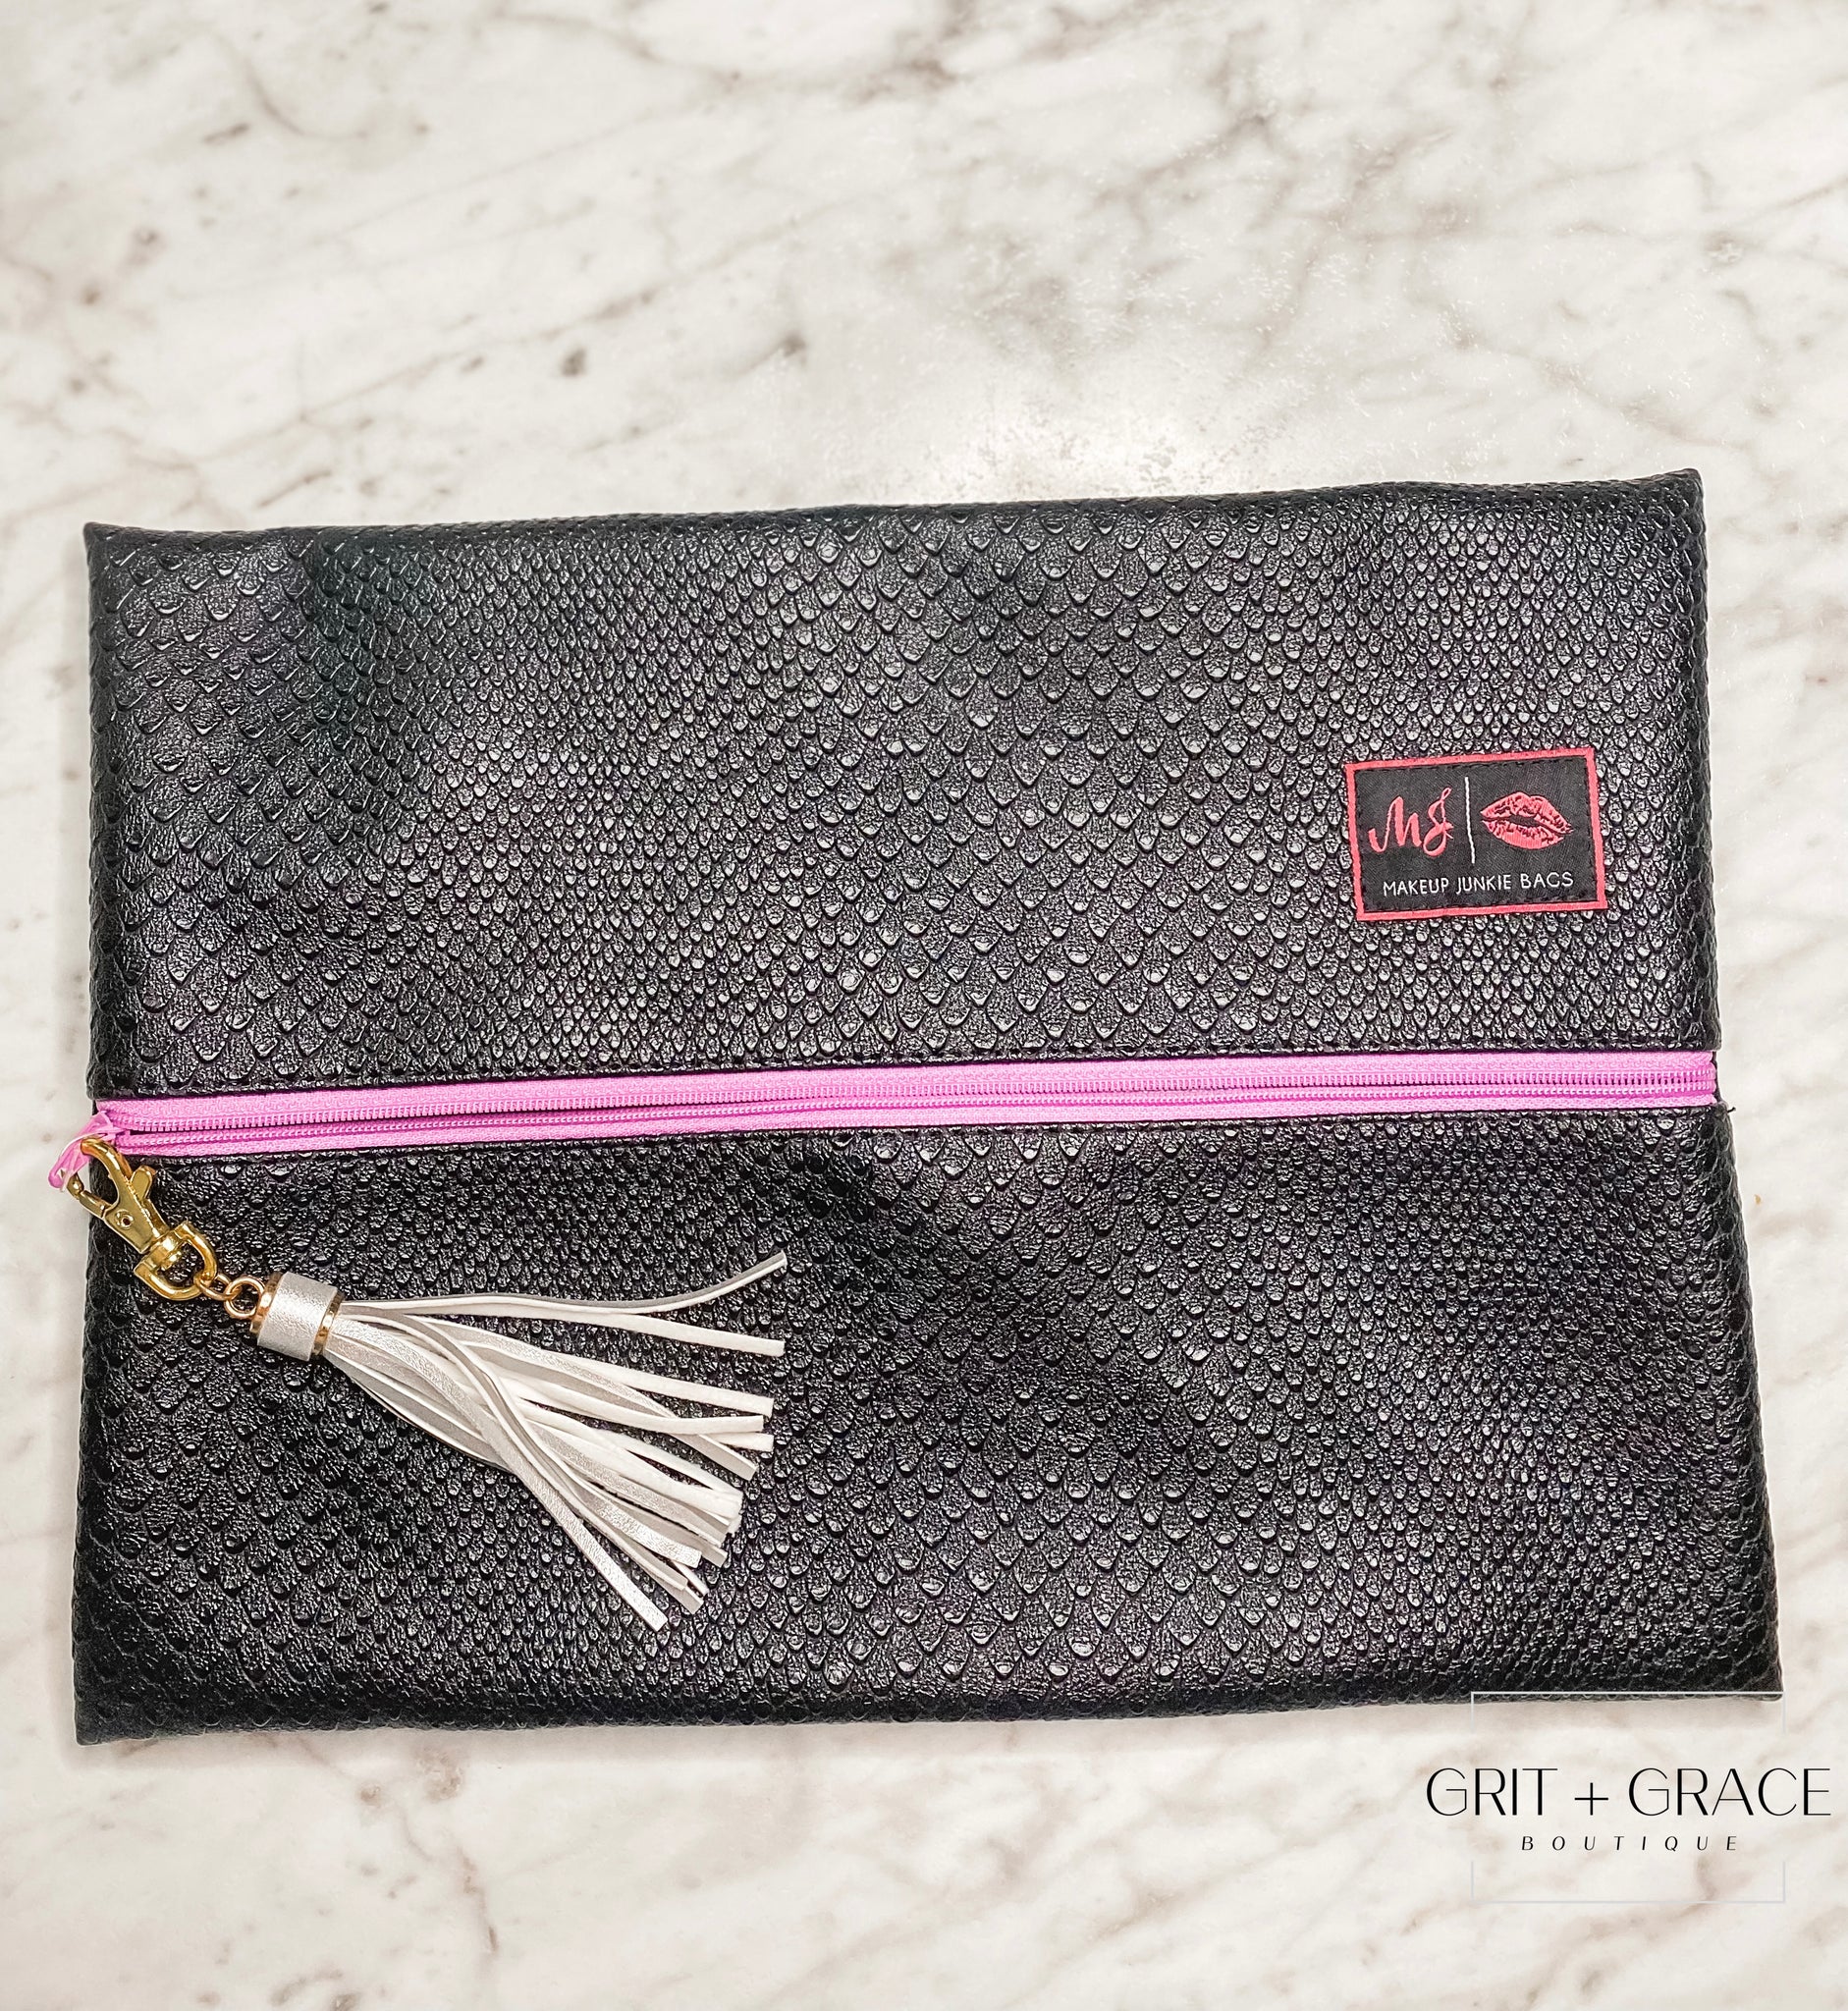 Cosmetic Bag (Large)